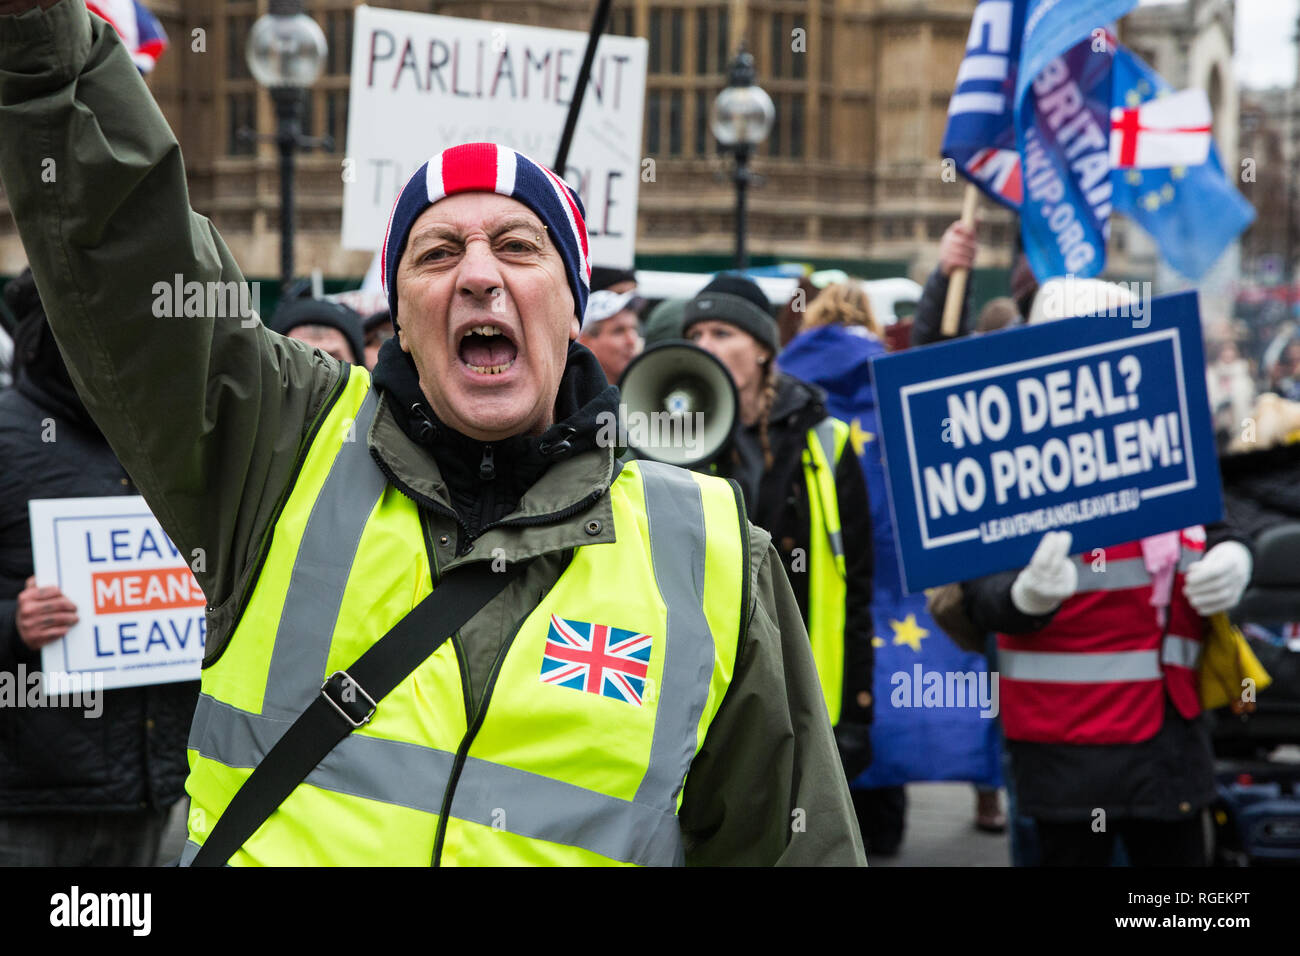 London, UK. 29th January, 2019. Pro-Brexit protesters outside Parliament on the day of votes in the House of Commons on amendments to the Prime Minister's final Brexit withdrawal agreement which could determine the content of the next stage of negotiations with the European Union. Credit: Mark Kerrison/Alamy Live News Stock Photo